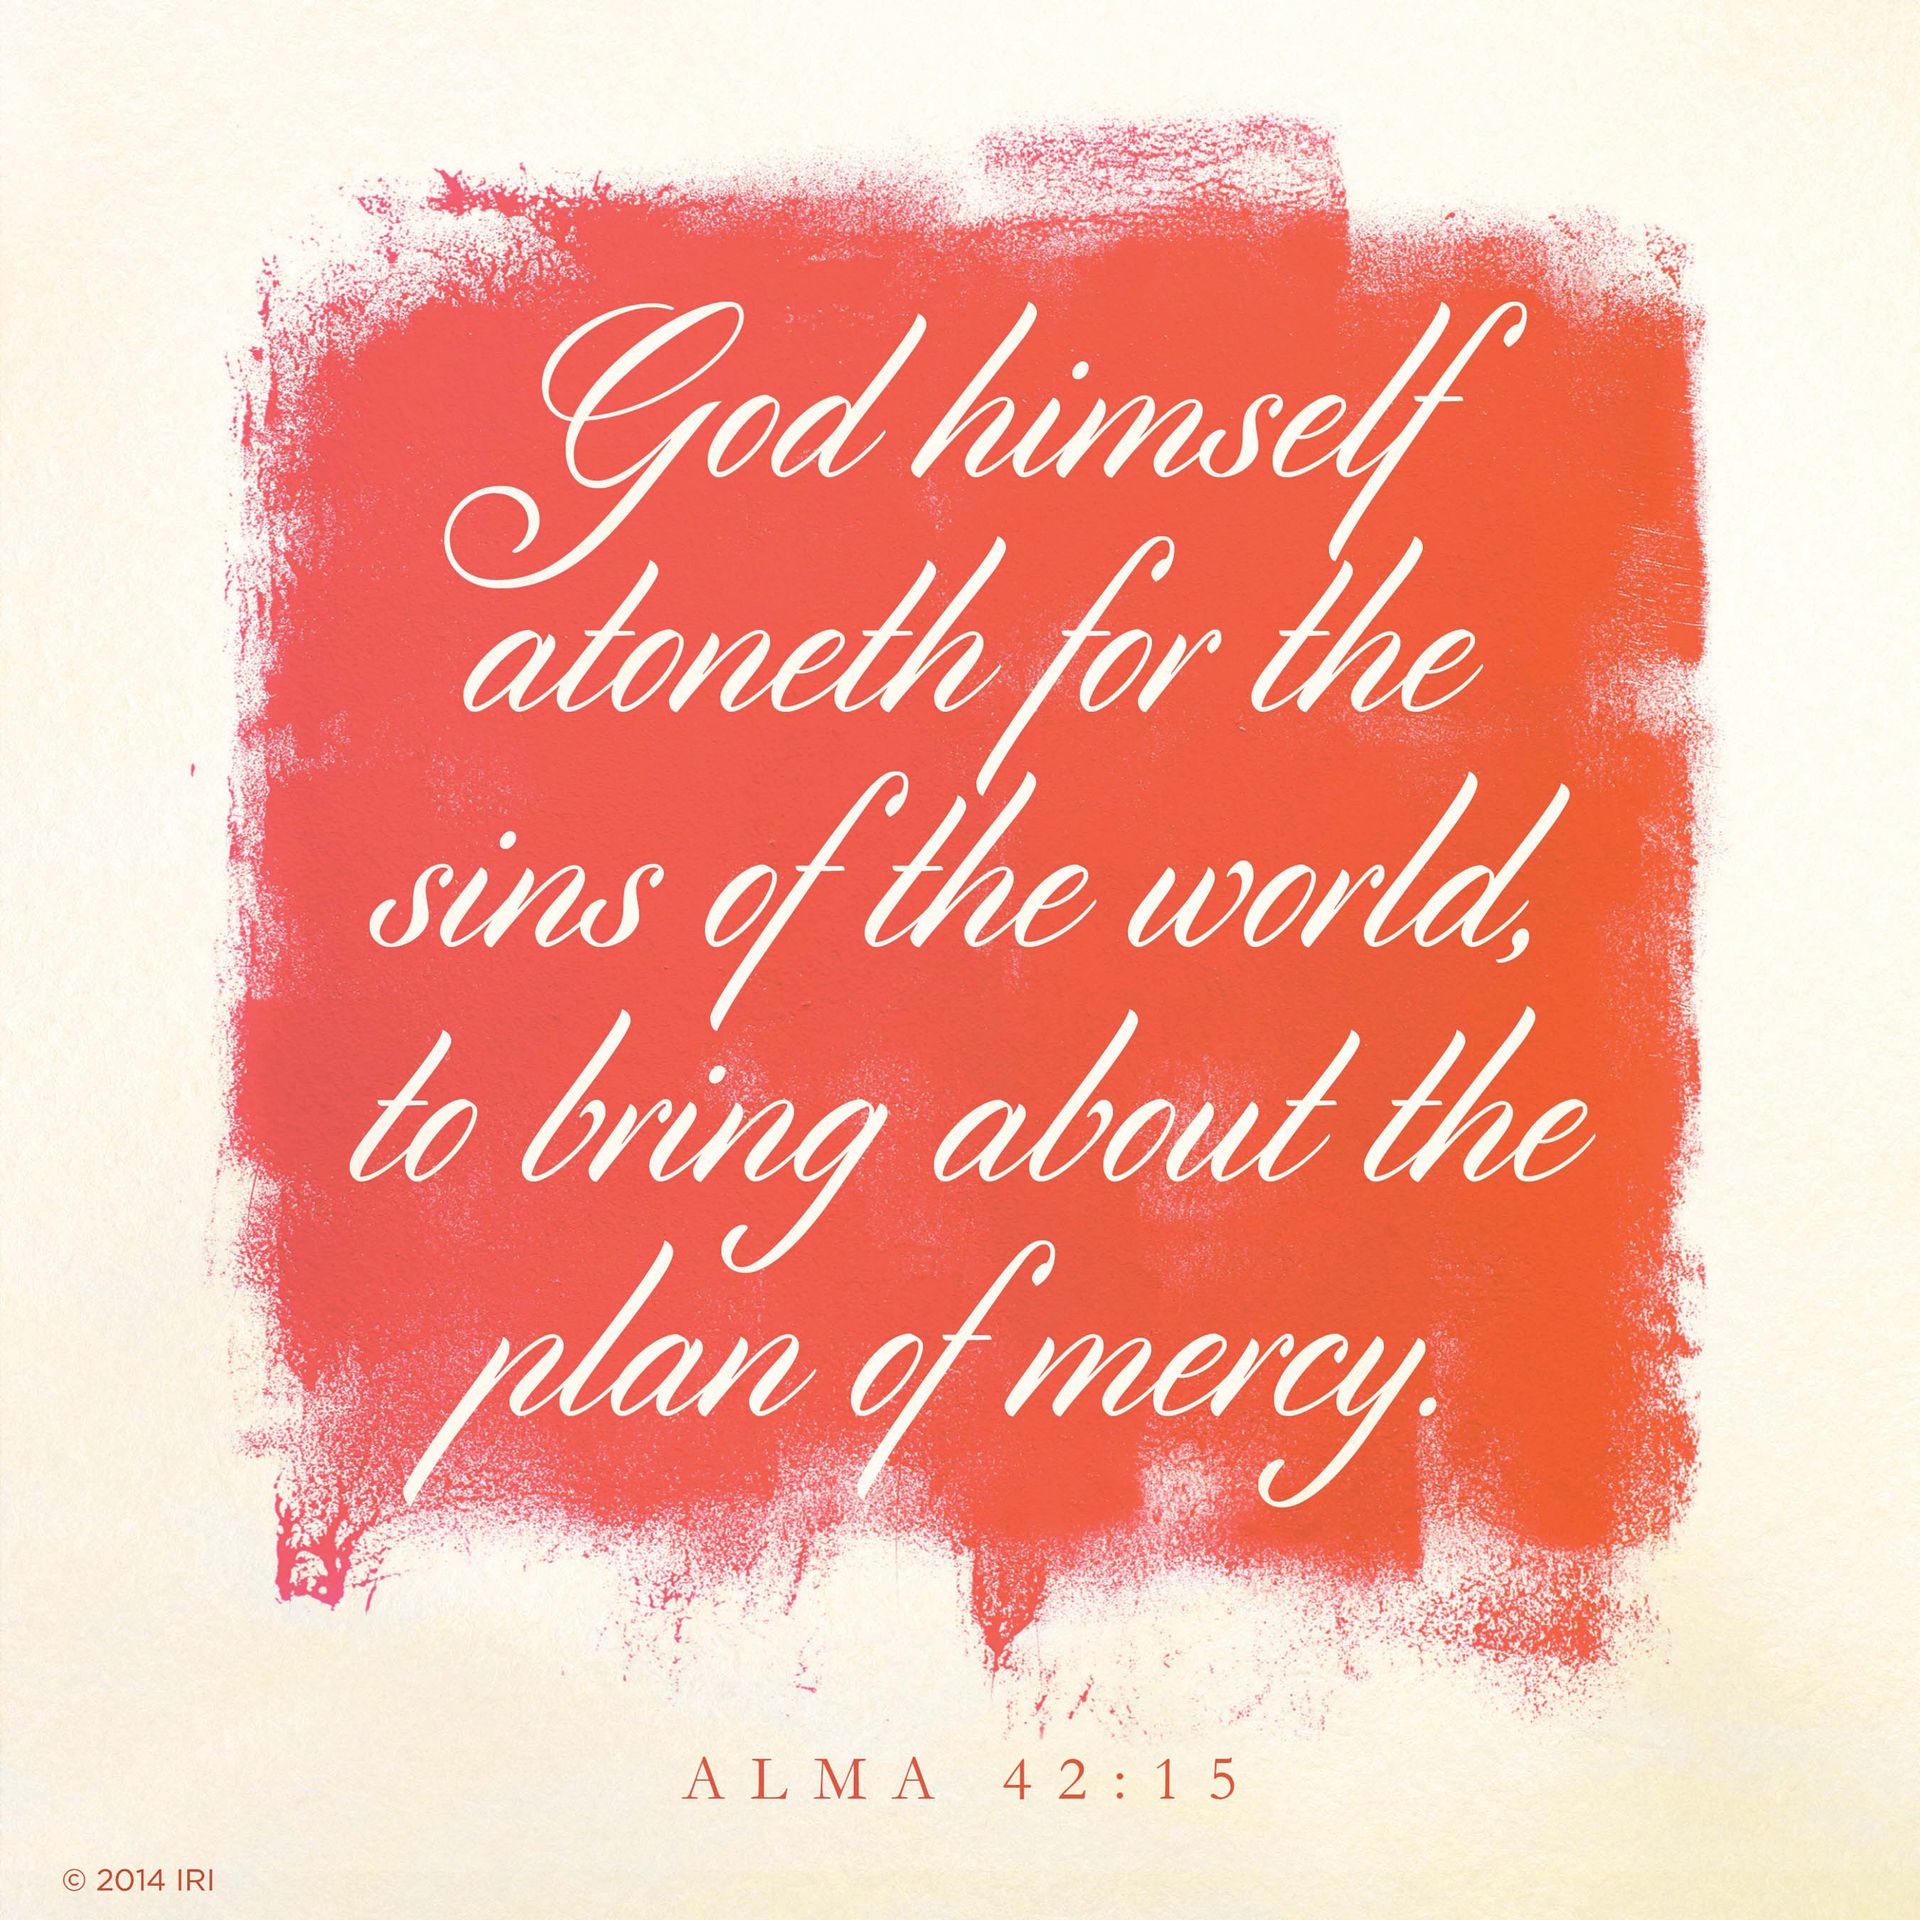 “God himself atoneth for the sins of the world, to bring about the plan of mercy.” —Alma 42:15